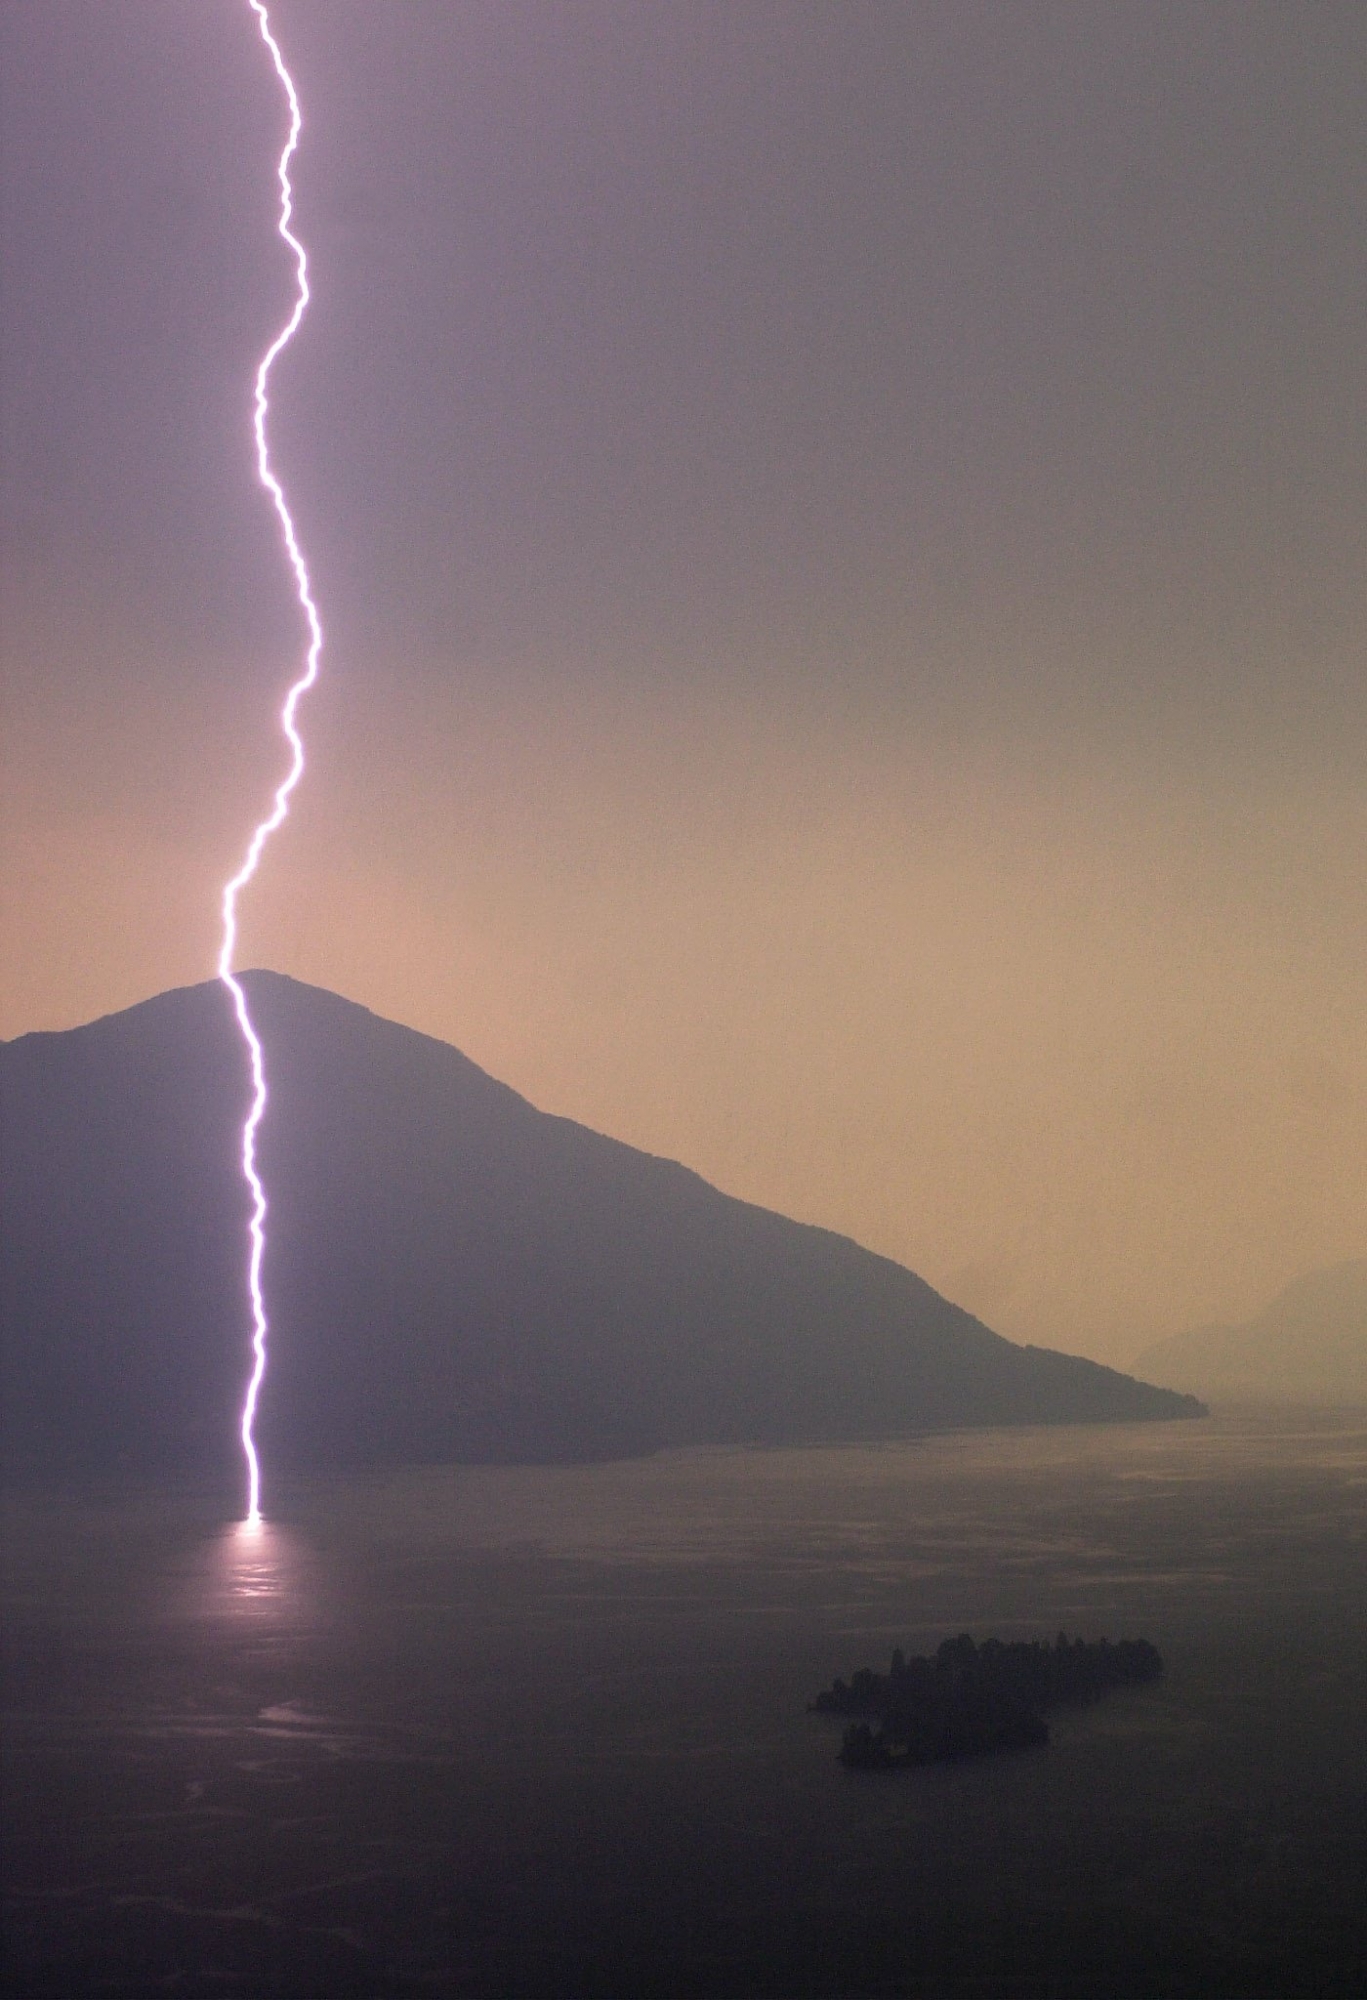 On the opening night of the 54th International Film Festival of Locarno, lightning illuminates the sky over the Lago Maggiore lake, seen from Roncon near Locarno, in the southern part of Switzerland, Thursday, August 2, 2001. (KEYSTONE/Martial Trezzini) === ELECTRONIC IMAGE ===